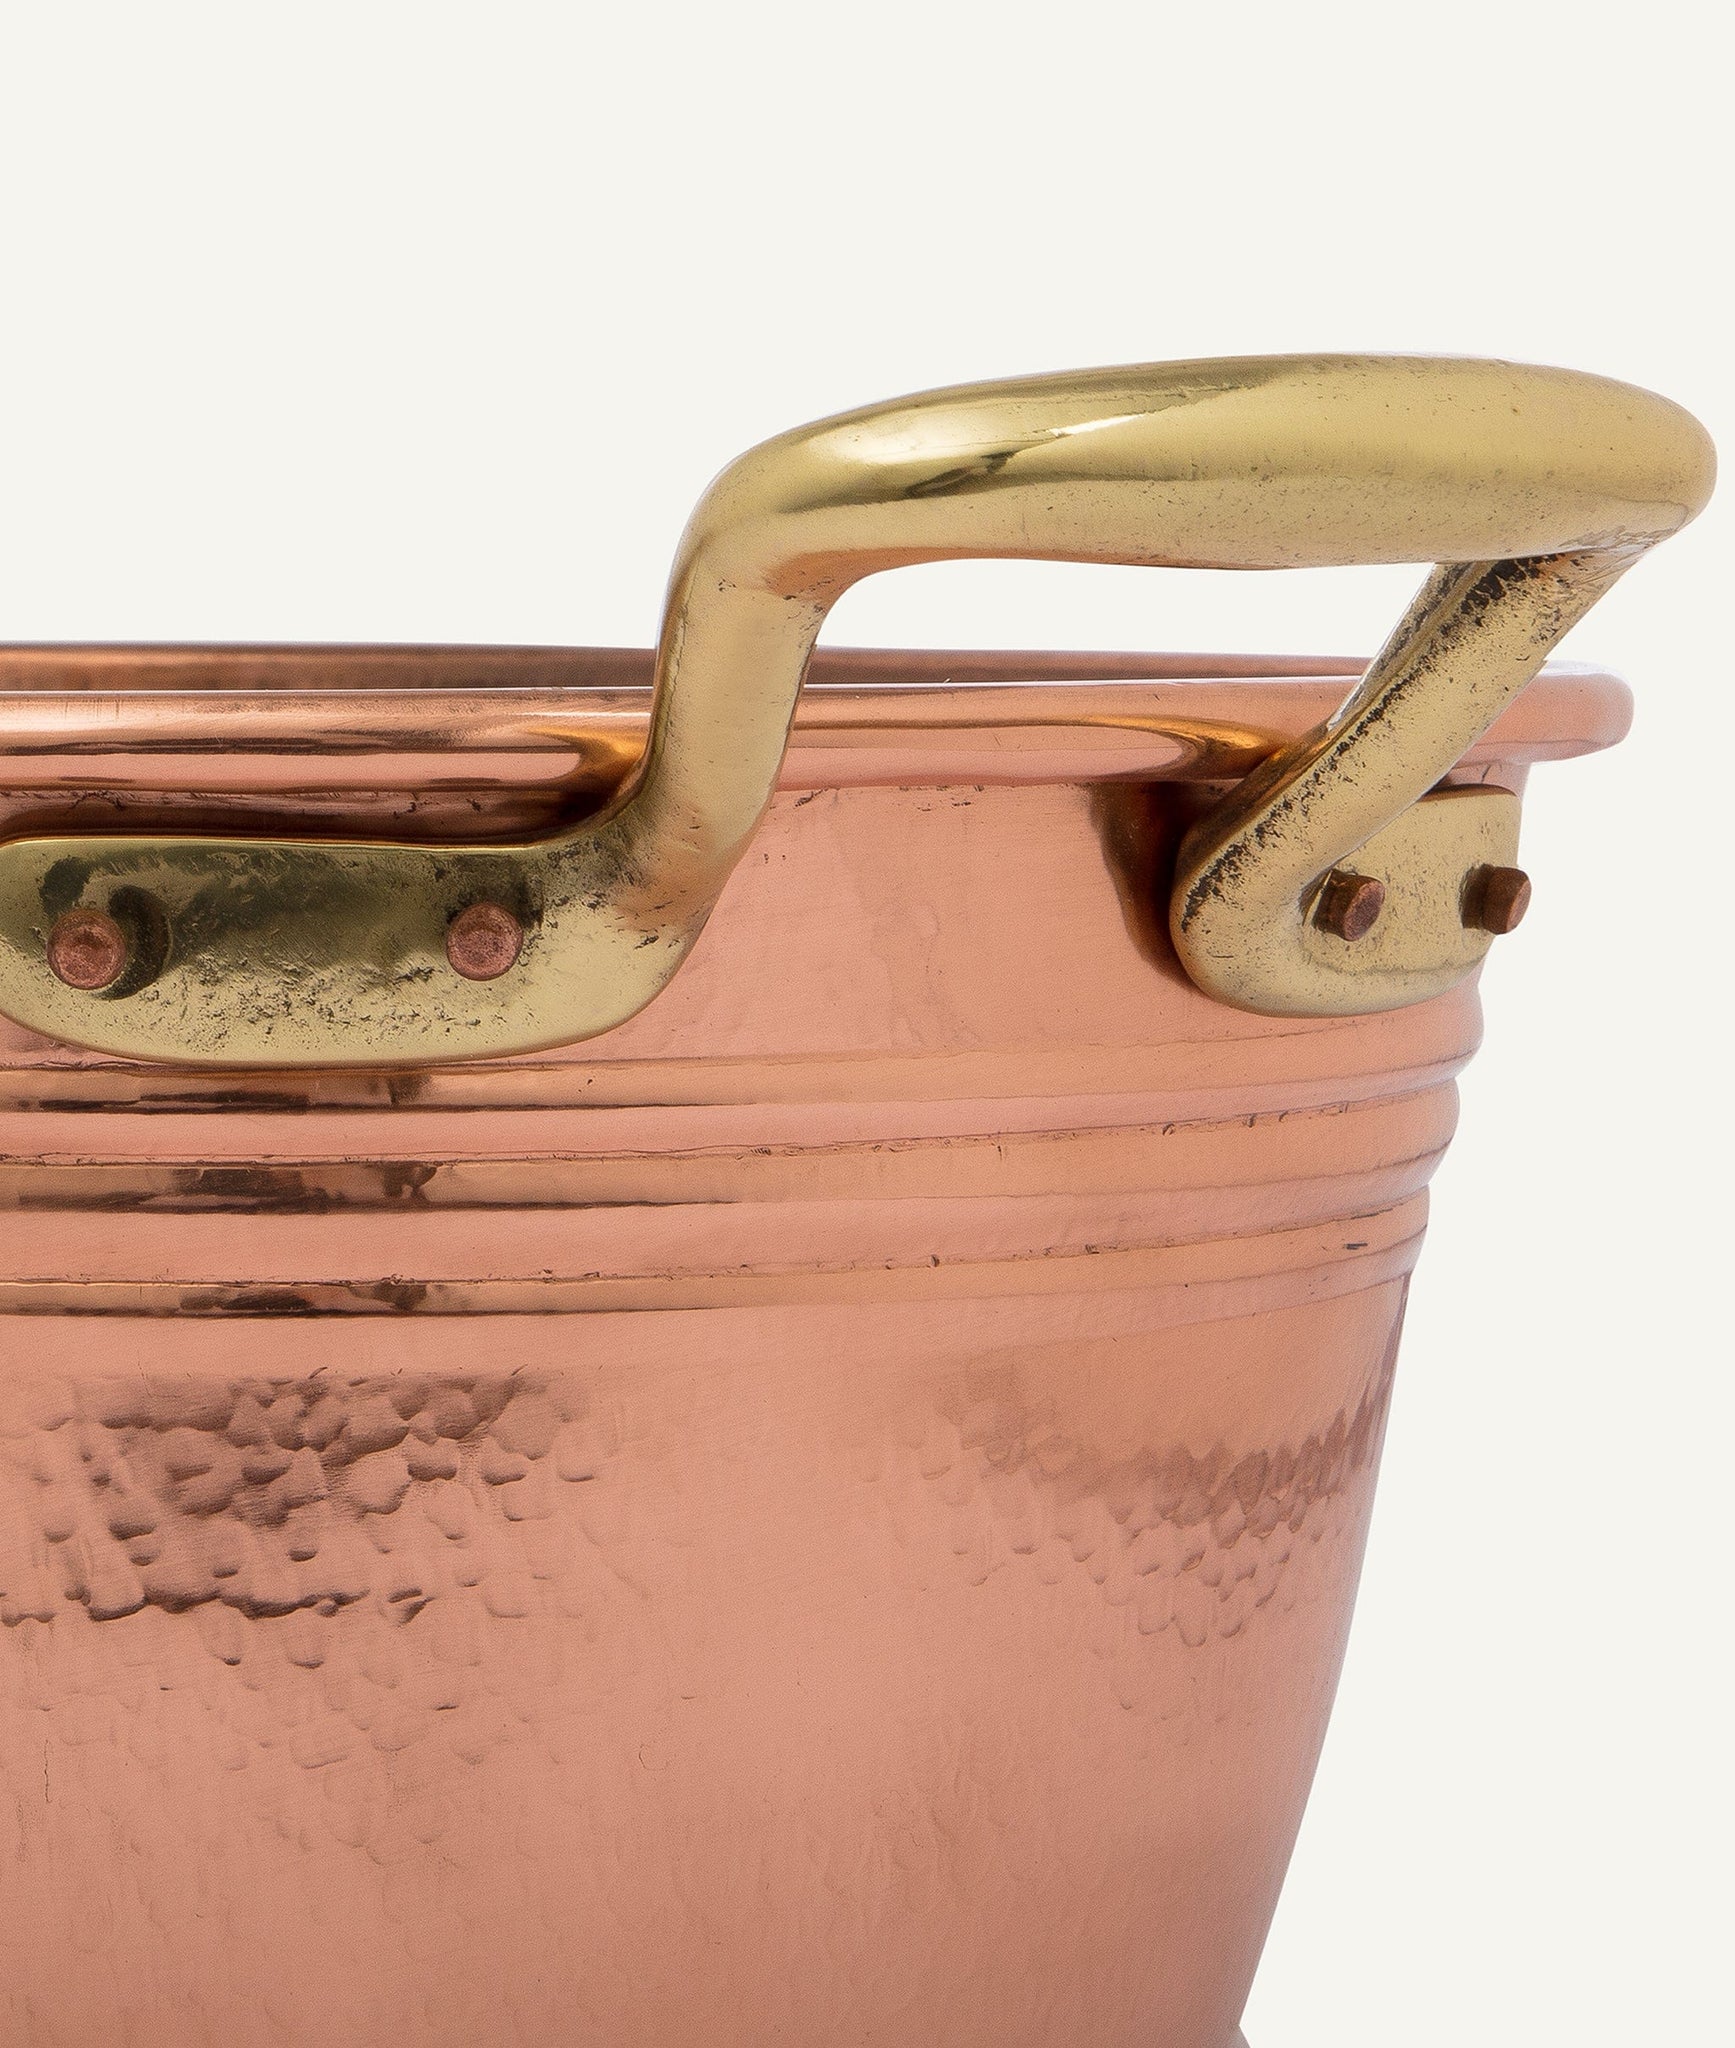 Large Champagne Bucket in Copper